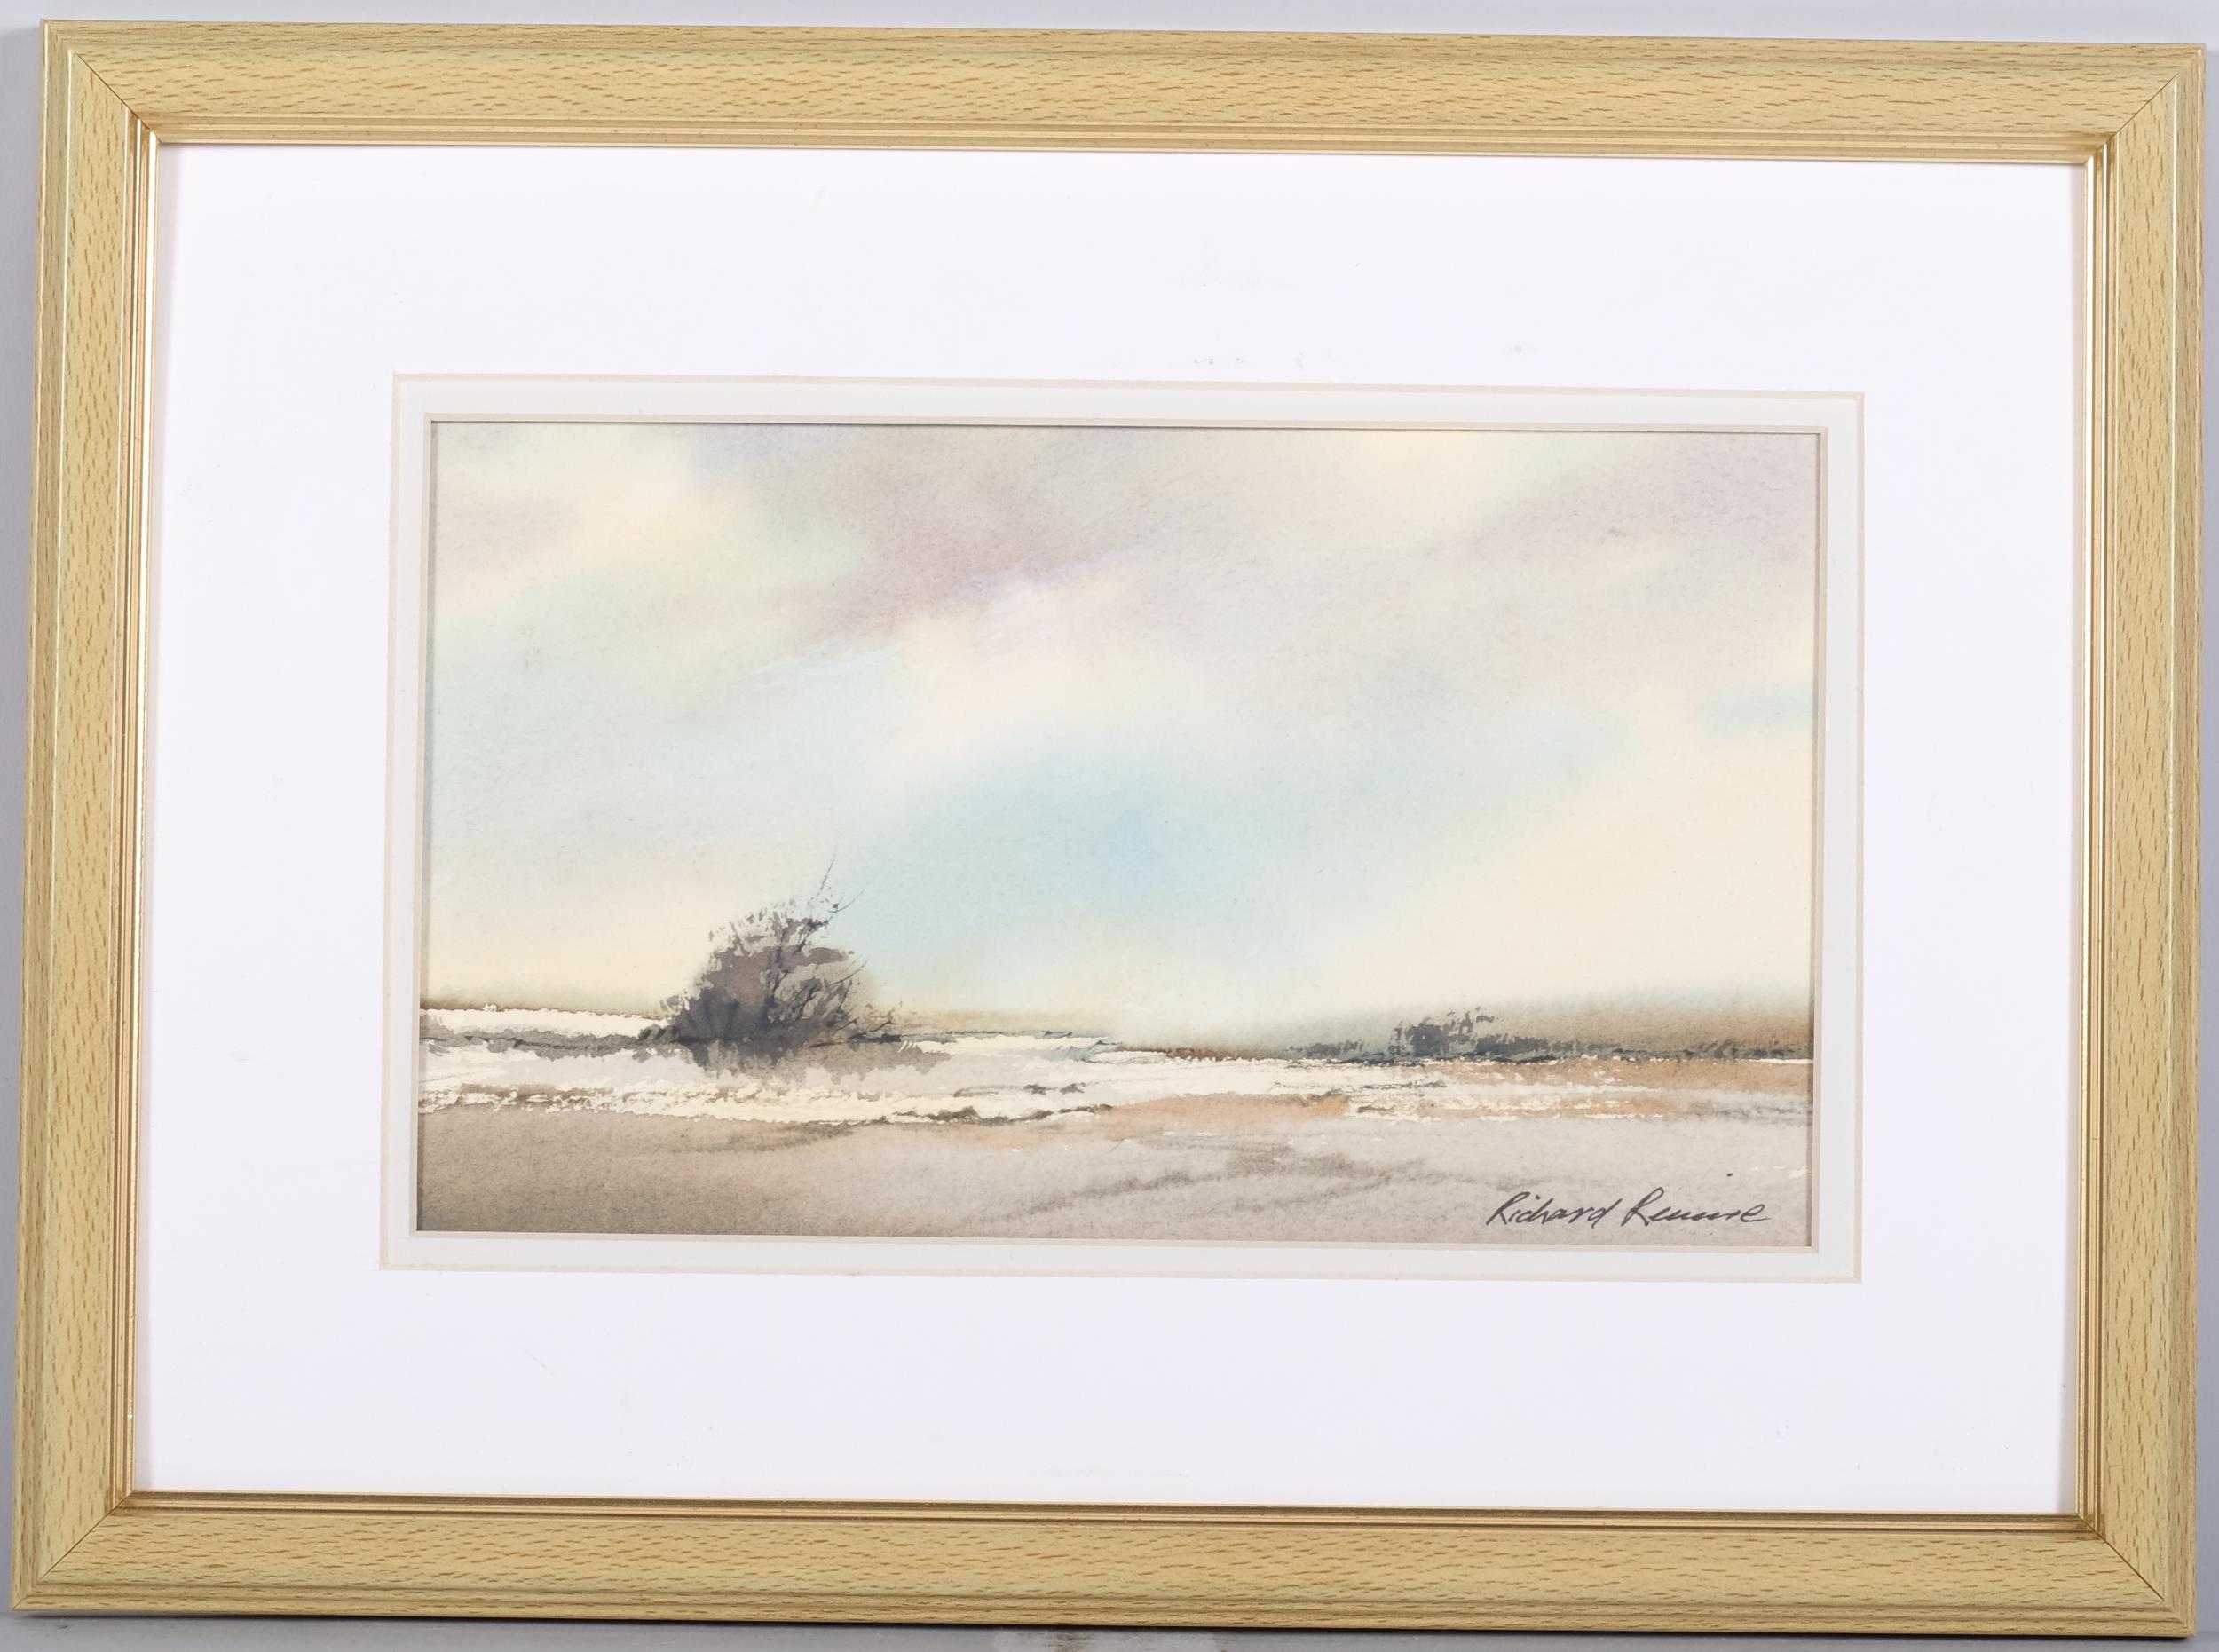 Richard Rennie (1932), watercolour on paper, Landscape with Clouds, signed lower right, 14cm x 24cm, - Image 2 of 4